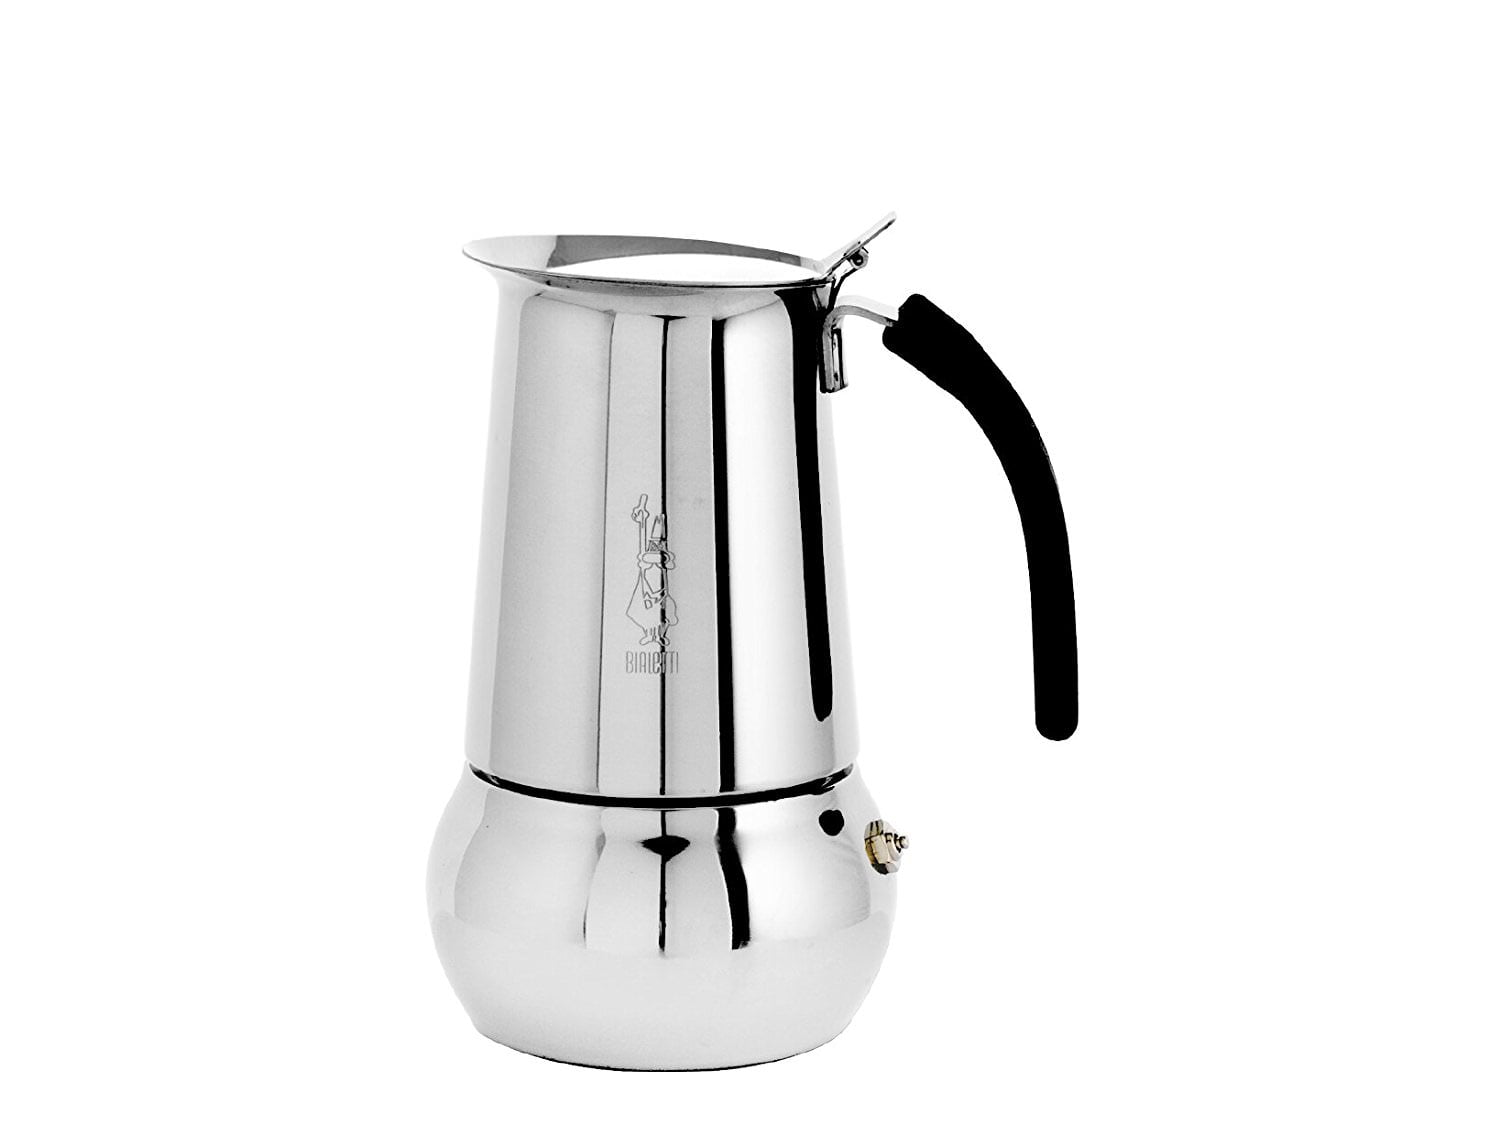 Bialetti Kitty Stainless Steel Stove Top Espresso Coffee Maker, 6 Cup 